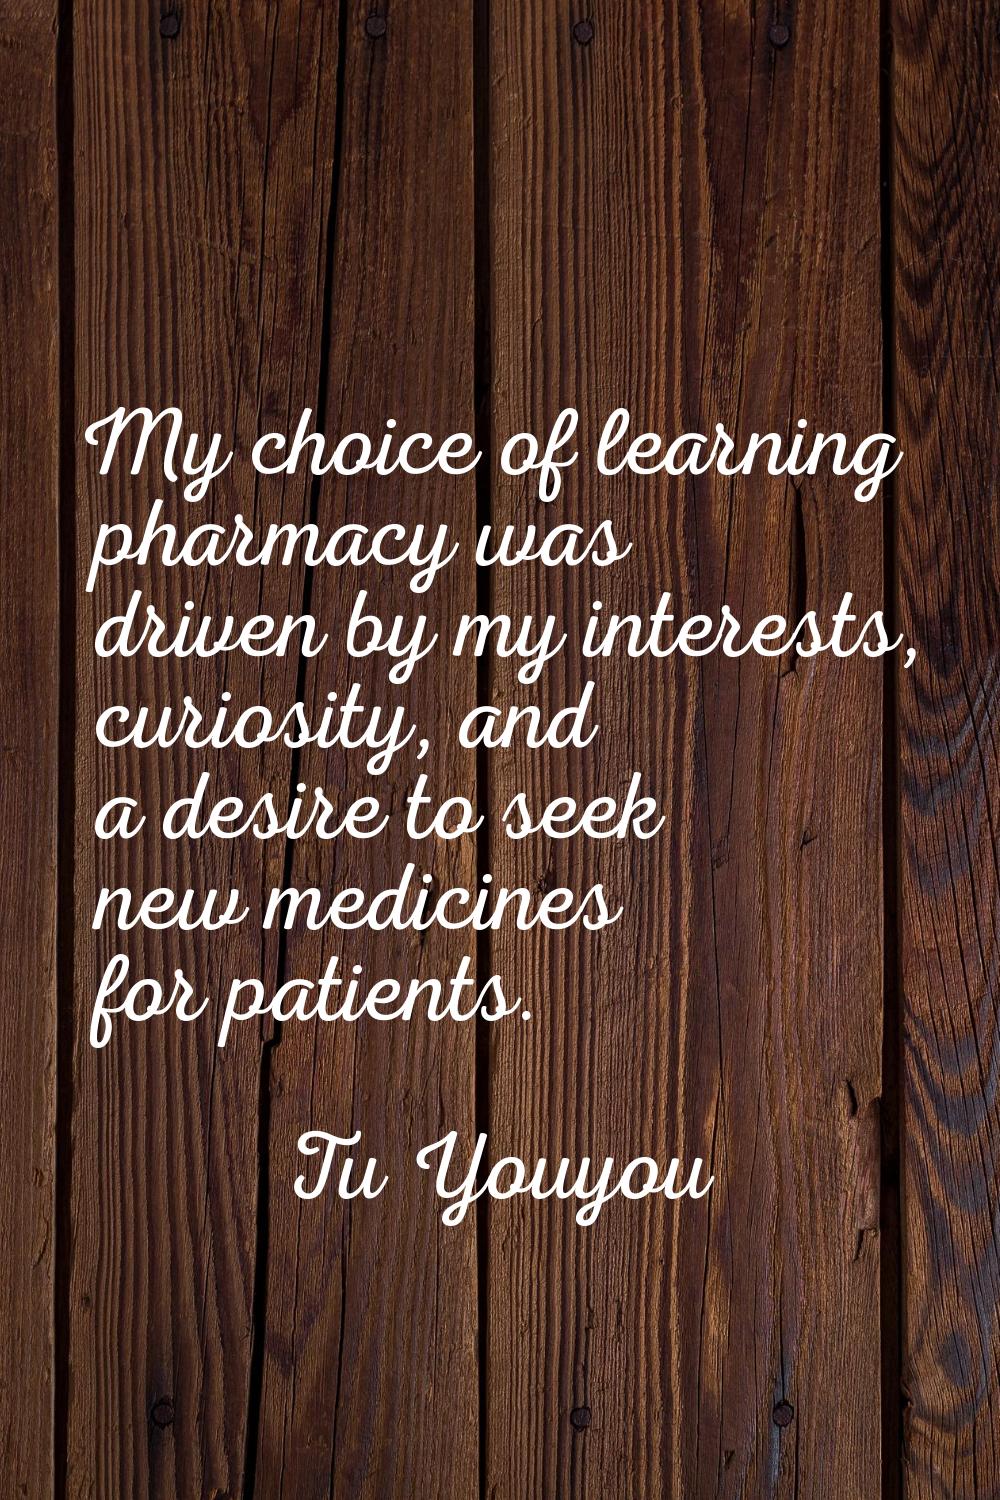 My choice of learning pharmacy was driven by my interests, curiosity, and a desire to seek new medi